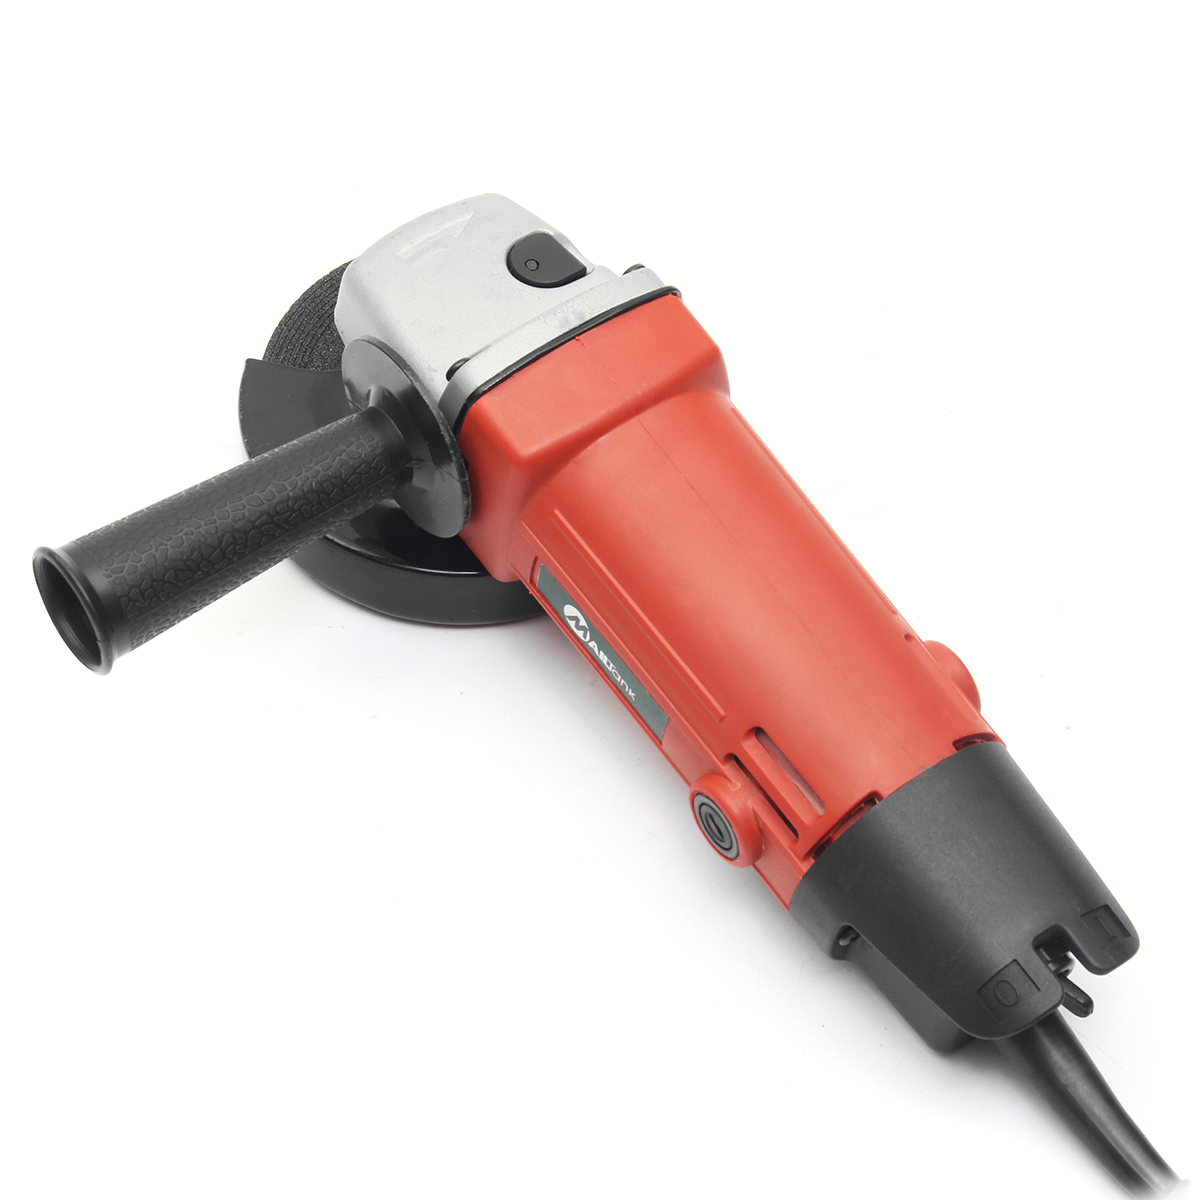 220V-600W-Multifunctional-Electric-Angle-Grinder-Polishing-Machine-Metal-Grinding-Cutter-Tool-1292095-8